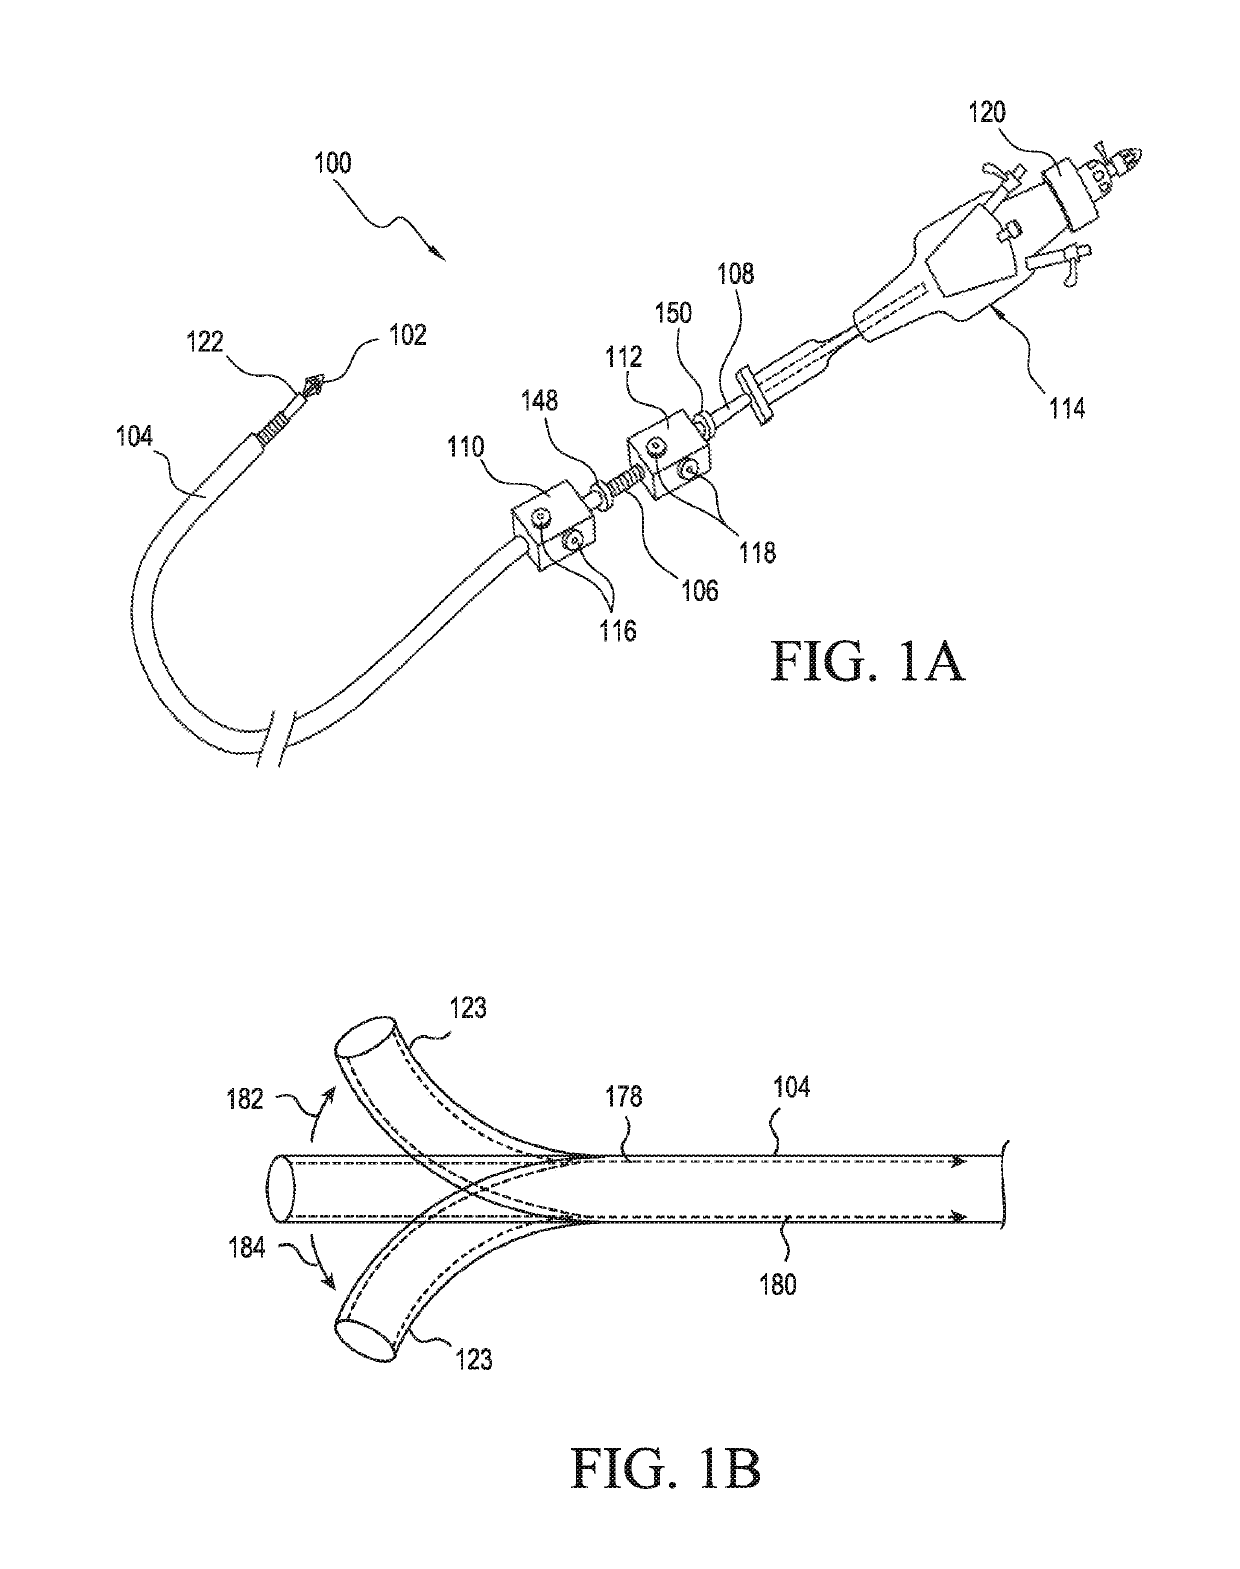 Systems and methods for intra-procedural cardiac pressure monitoring